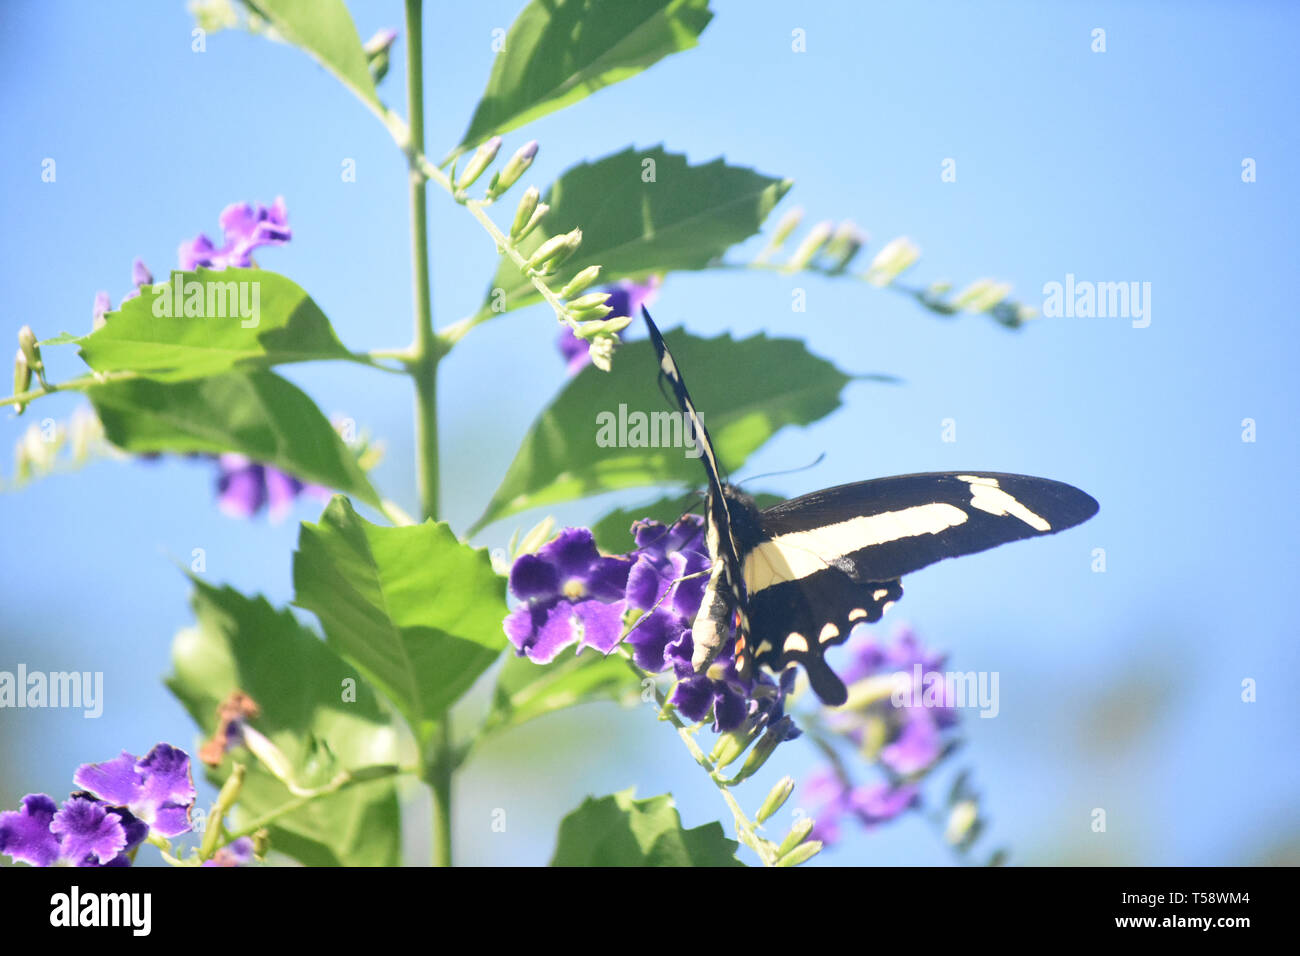 Purple flowers with a yellow swallowtail butterfly on them. Stock Photo